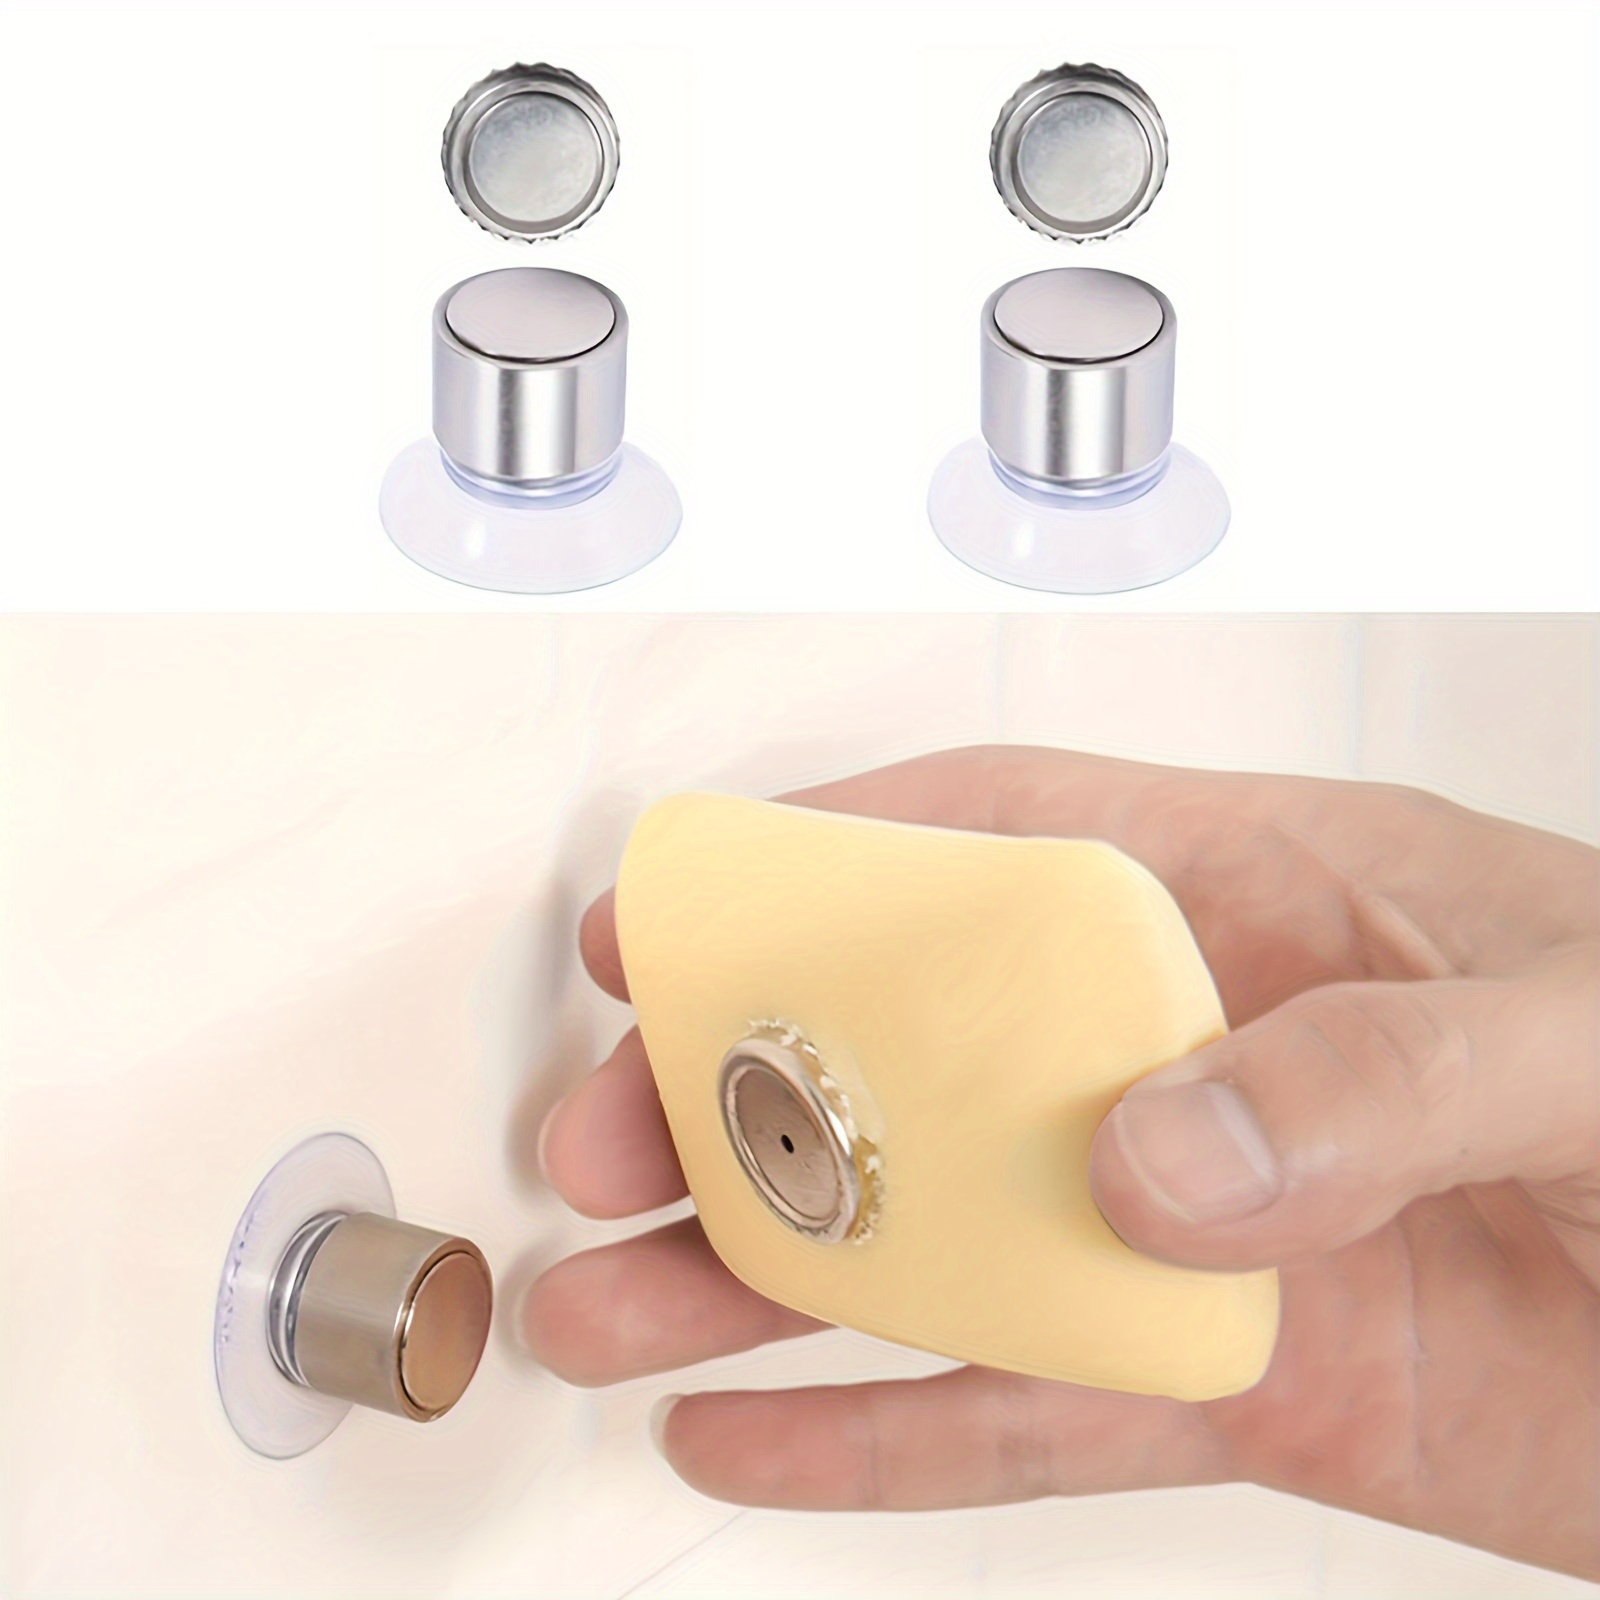 

1/2pcs Stainless Steel Magnetic Soap Holder, Hanging Bar Soap Dish With Suction Cup, Wall Mount Soap Tray For Shower Bathroom Kitchen Sink